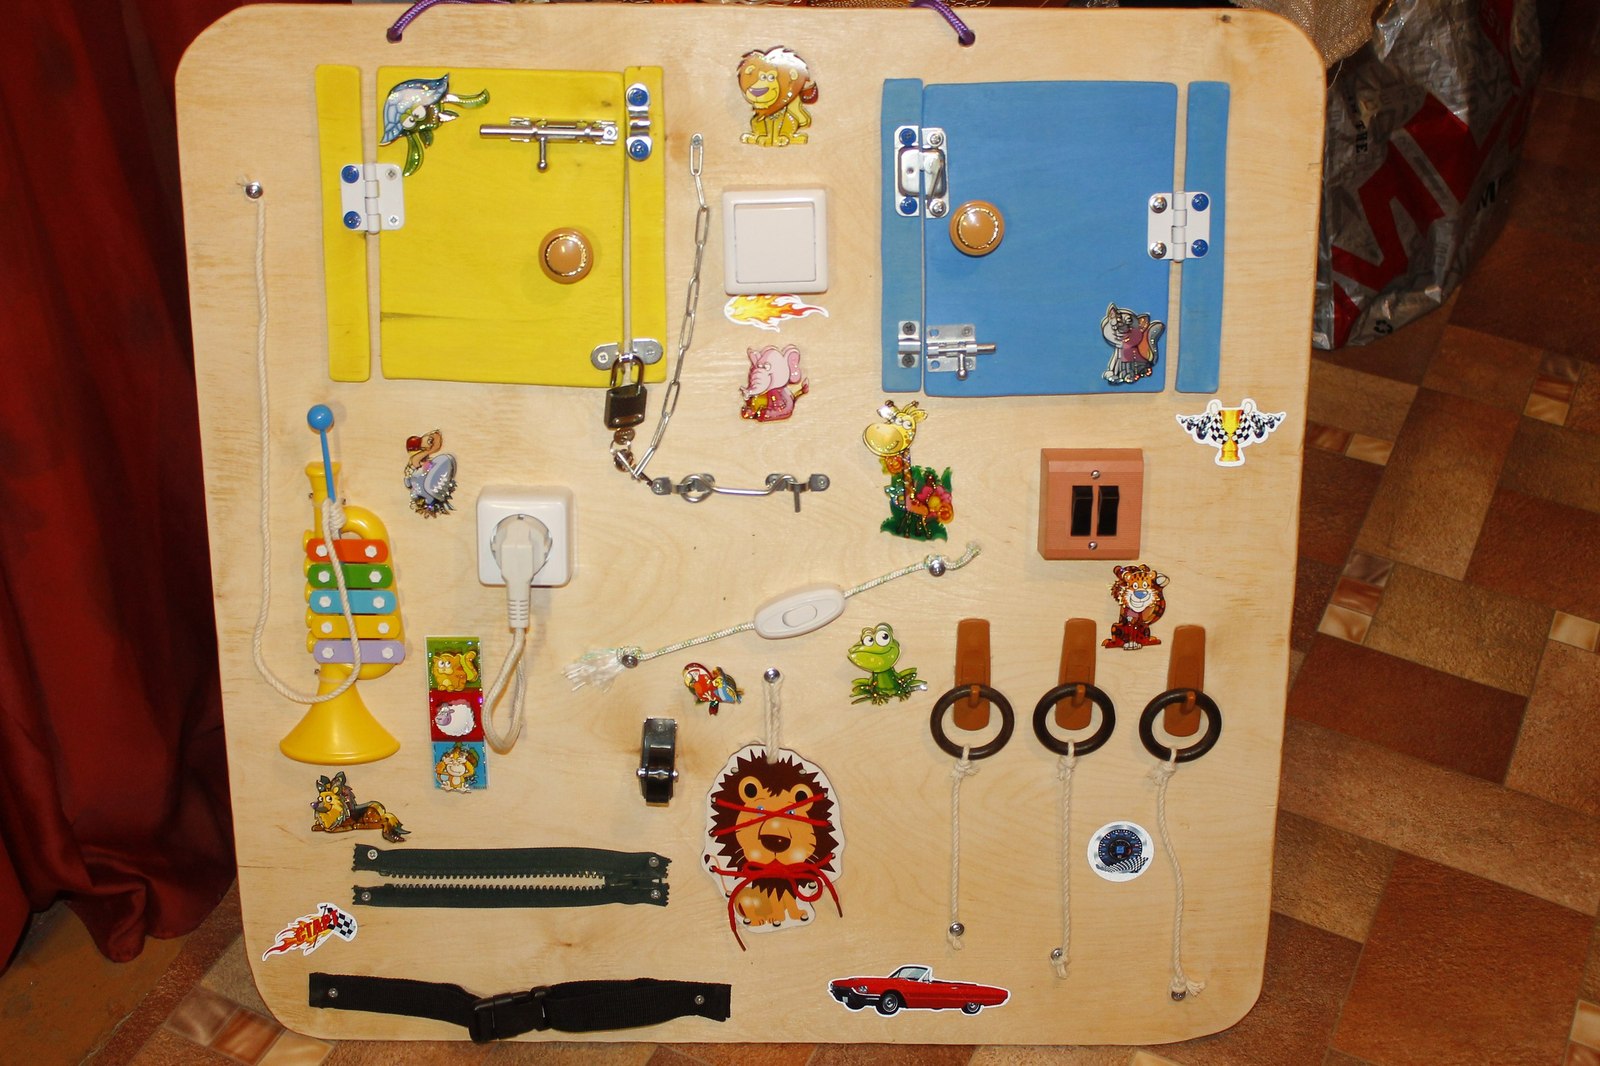 Developing board or do-it-yourself board - Rukozhop, Needlework, With your own hands, Handmade, Busyboard, , Developing, 